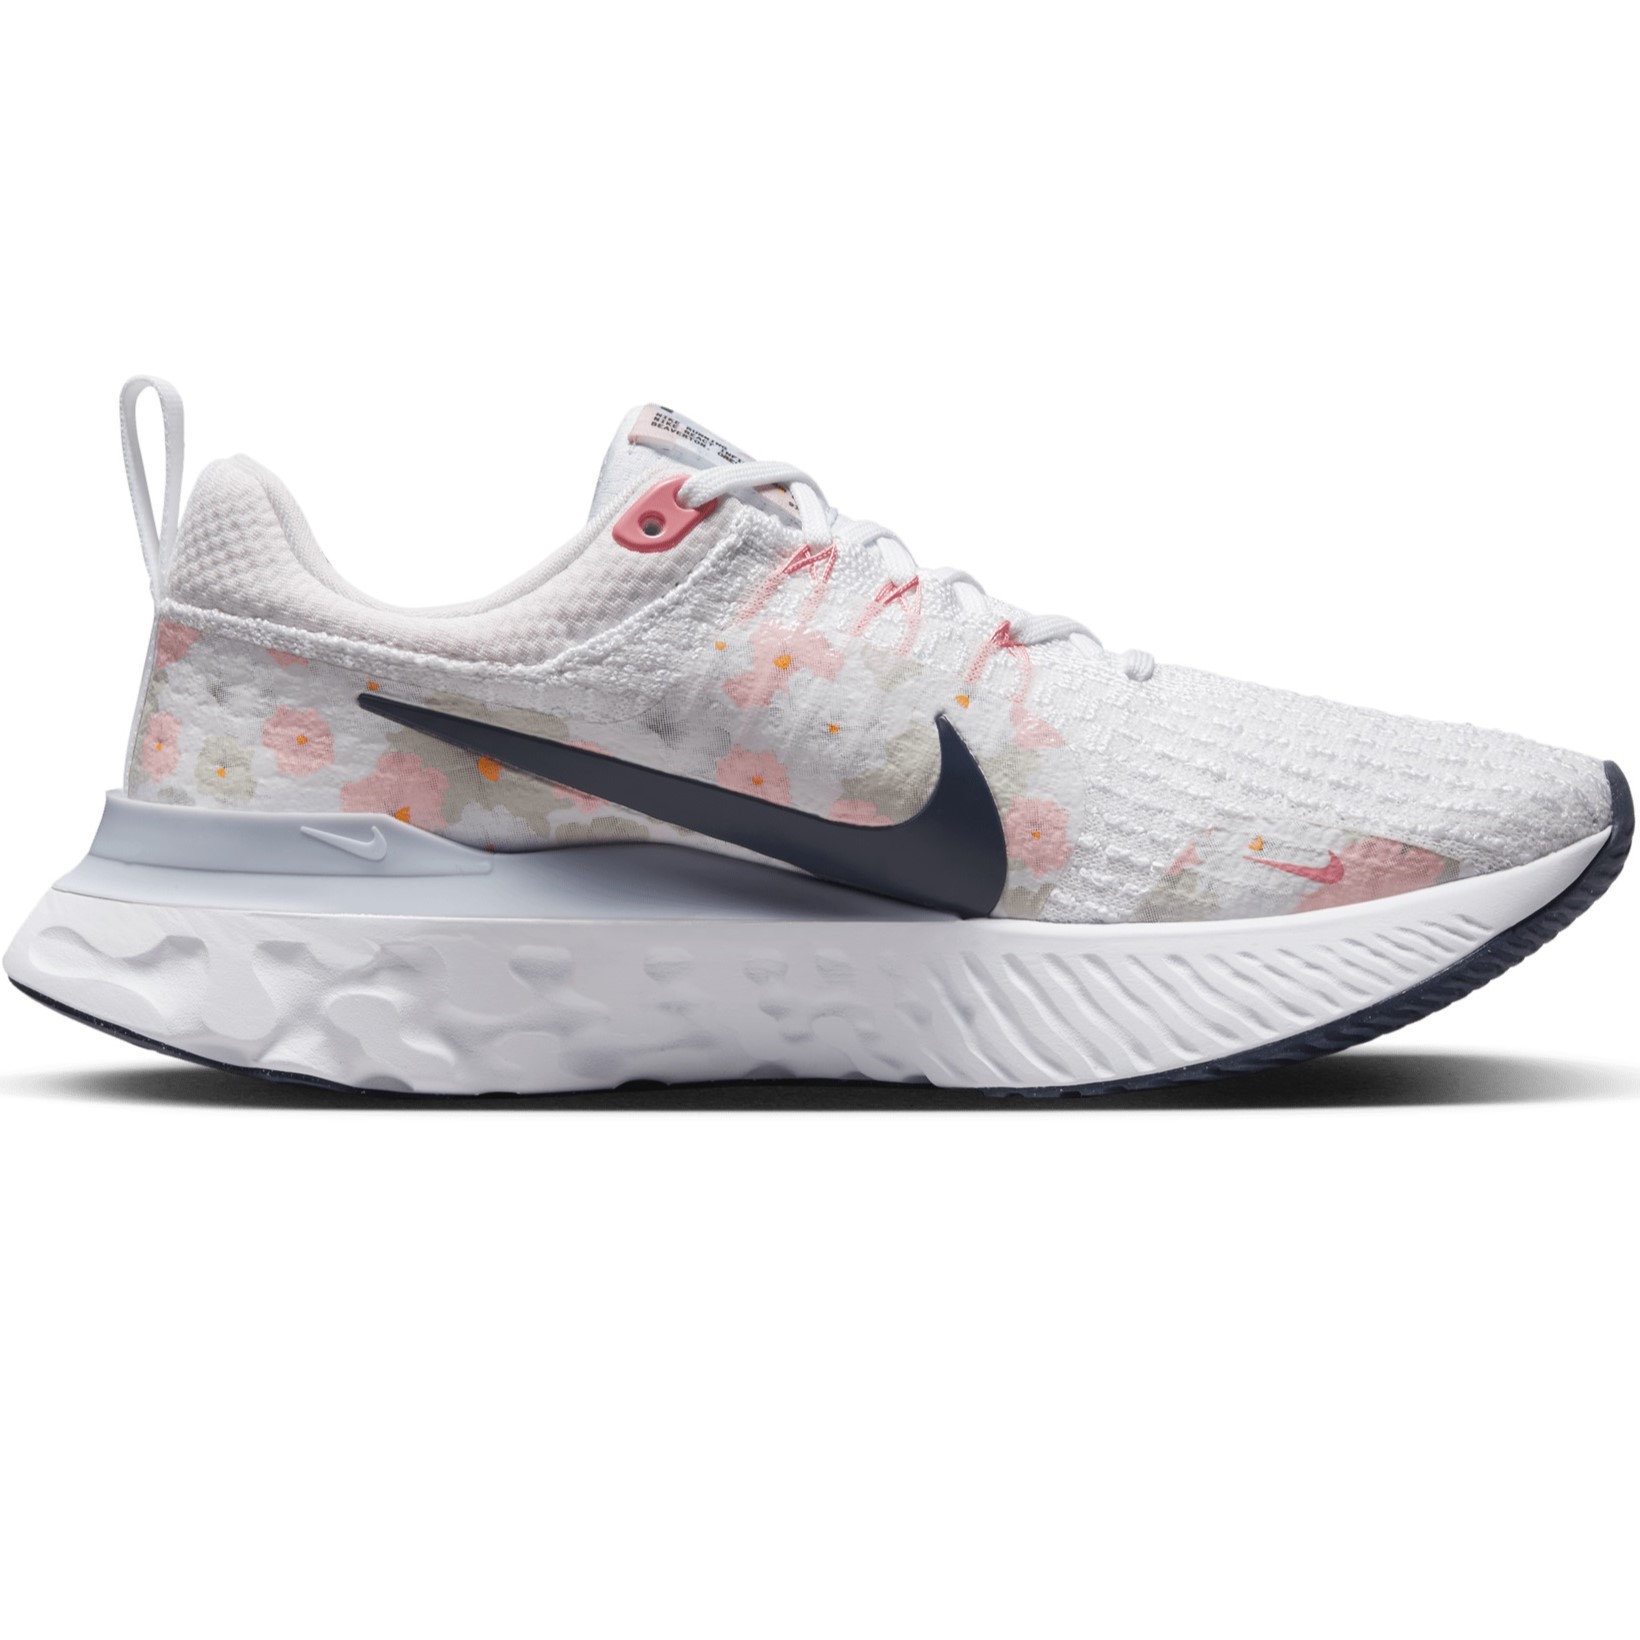 GIÀY NIKE NỮ REACT INFINITY 3 PREMIUM WHITE PEARL PINK WOMENS ROAD RUNNING SHOES FD4151-100 2